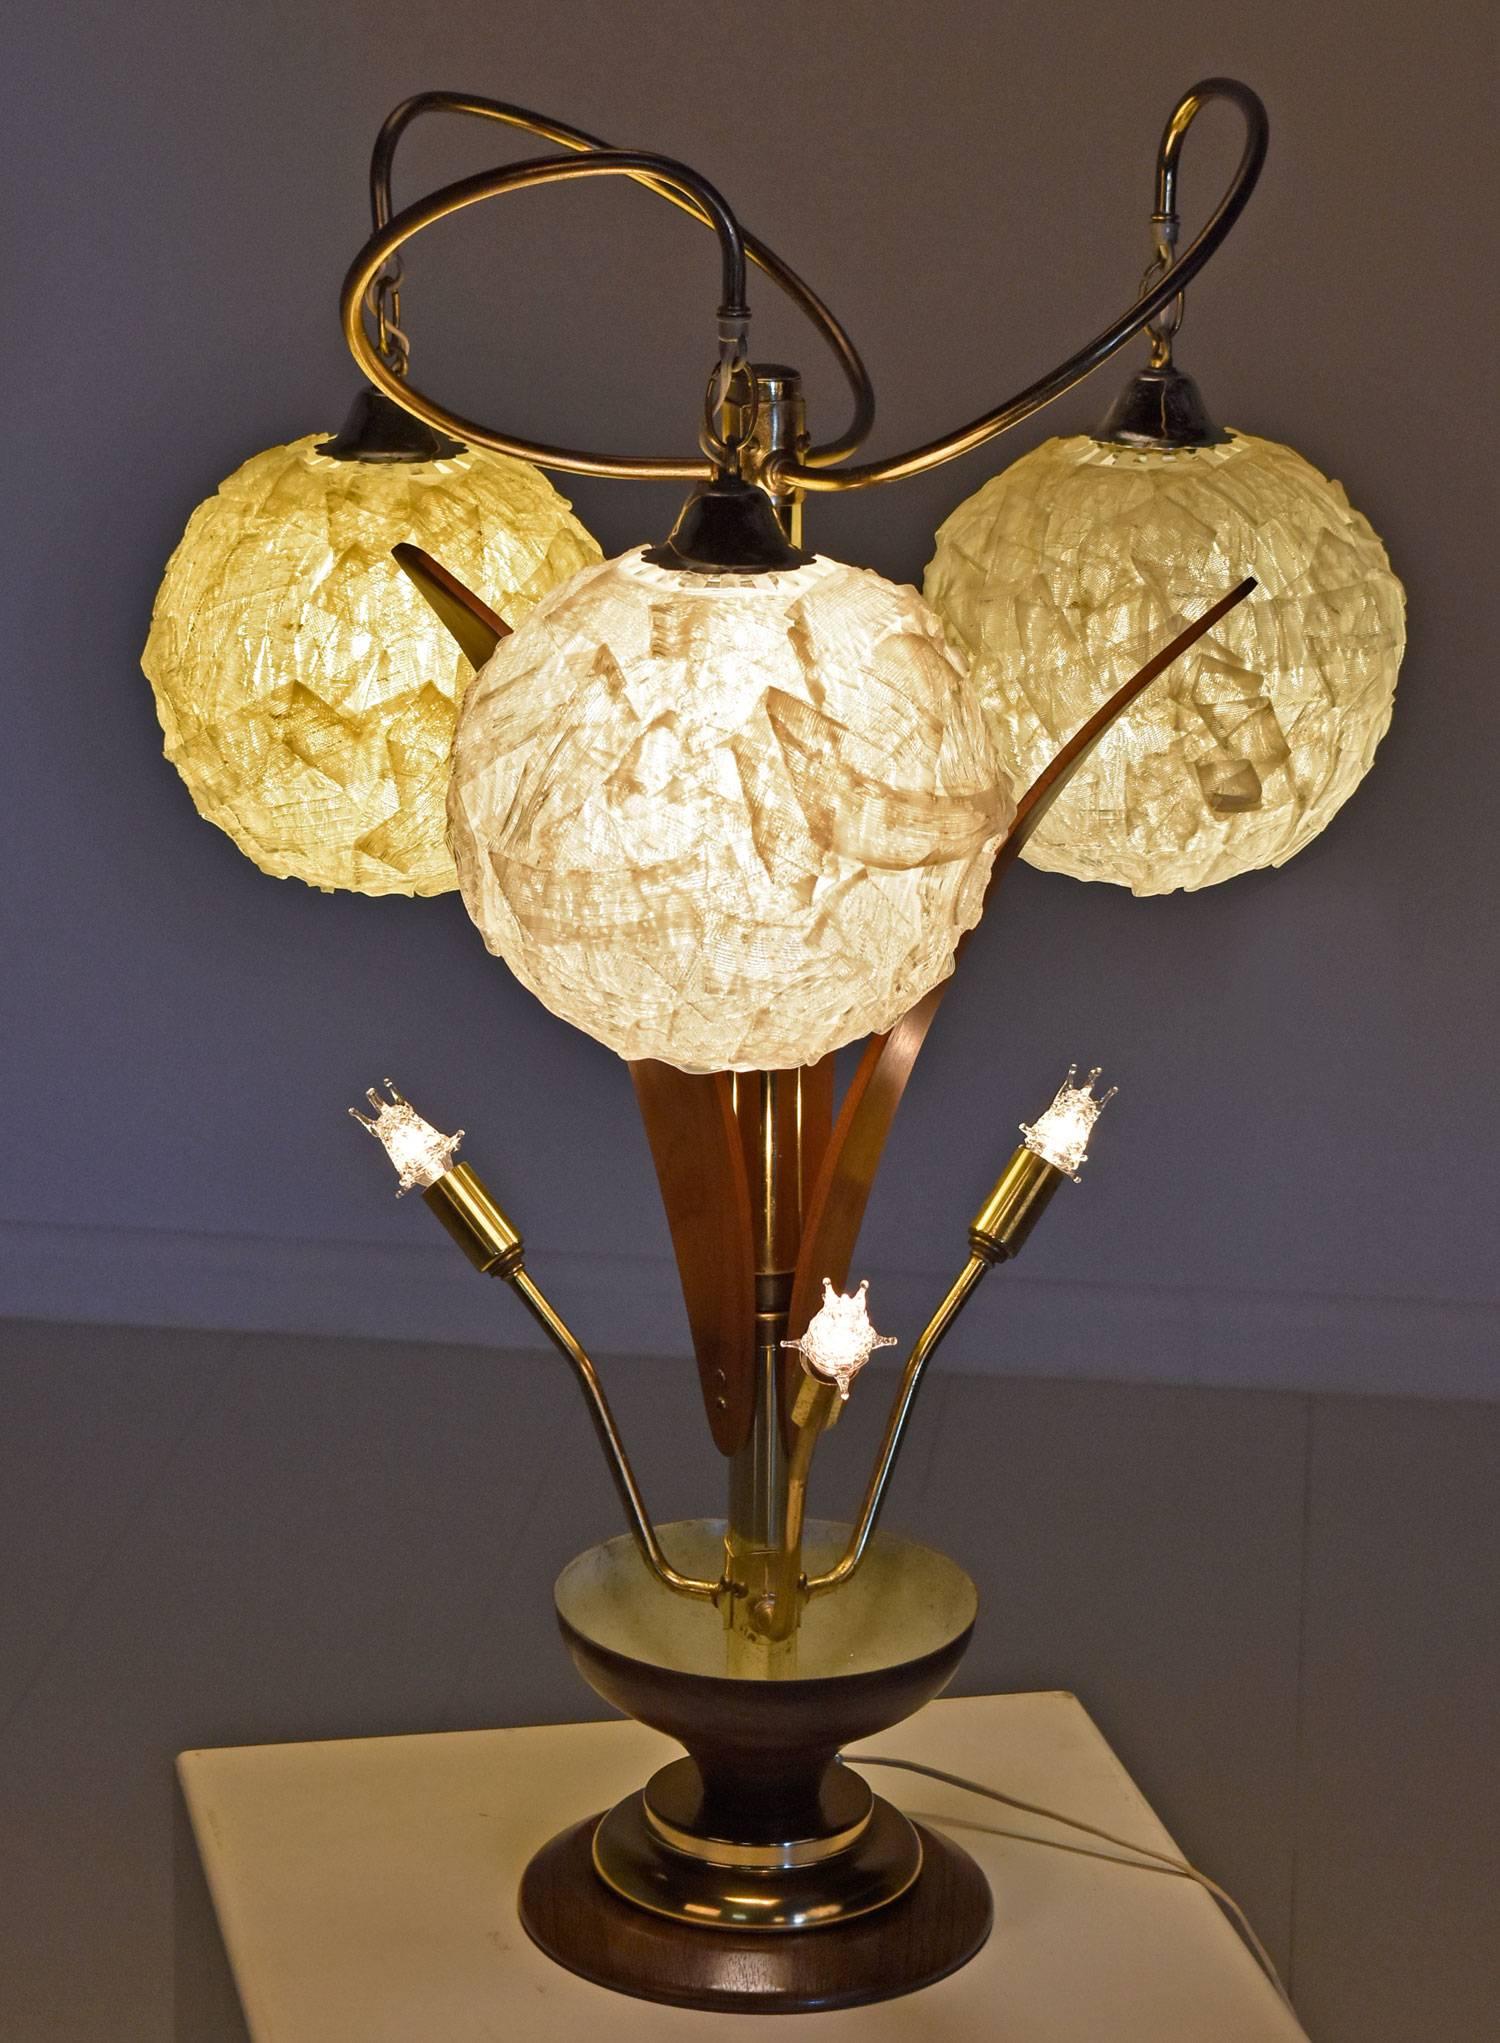 Stunning Mid-Century Modern spaghetti Lucite lamp with three globes and walnut accents. This lamp is oozing atomic age charm! Look at the swirling gold rods supporting the three goopy Lucite globes hovering above a bed of Sputnik spotlights. The